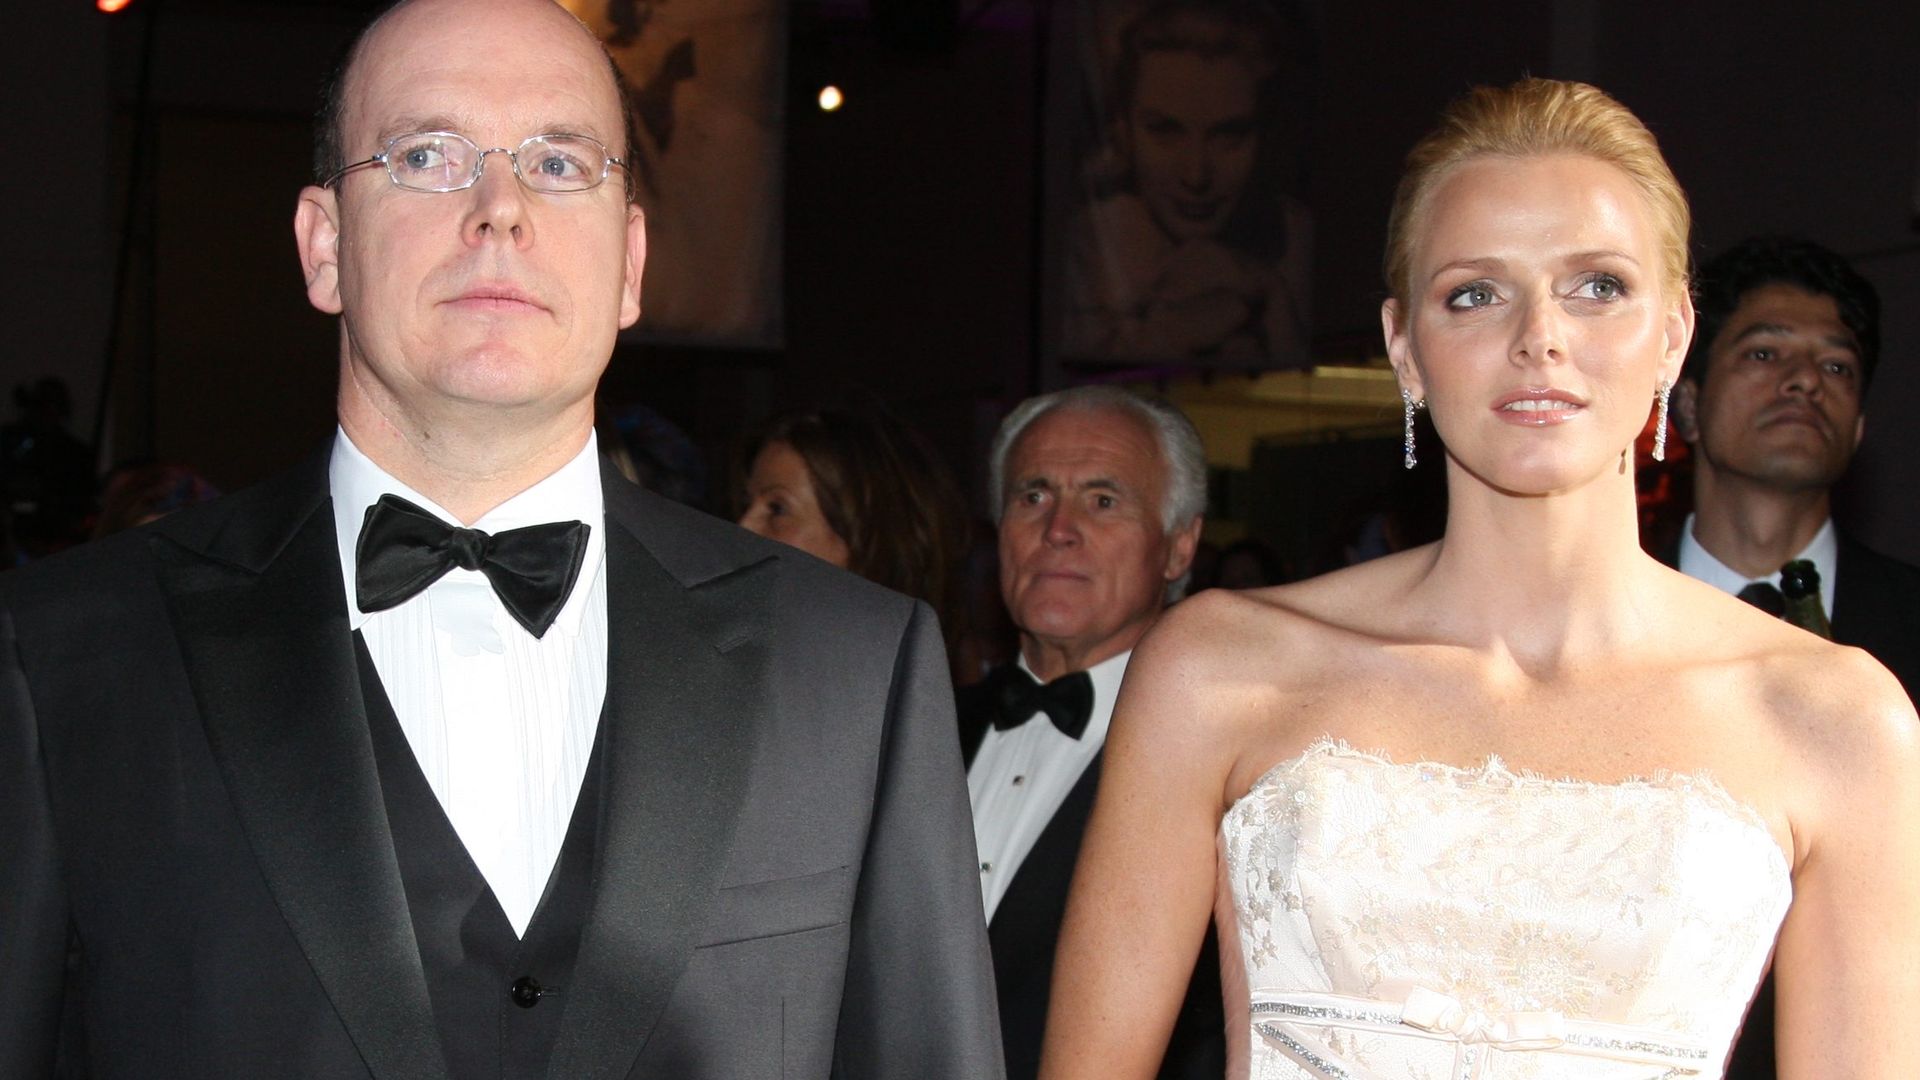 Princess Charlene in a strapless white dress with her husband Prince Albert